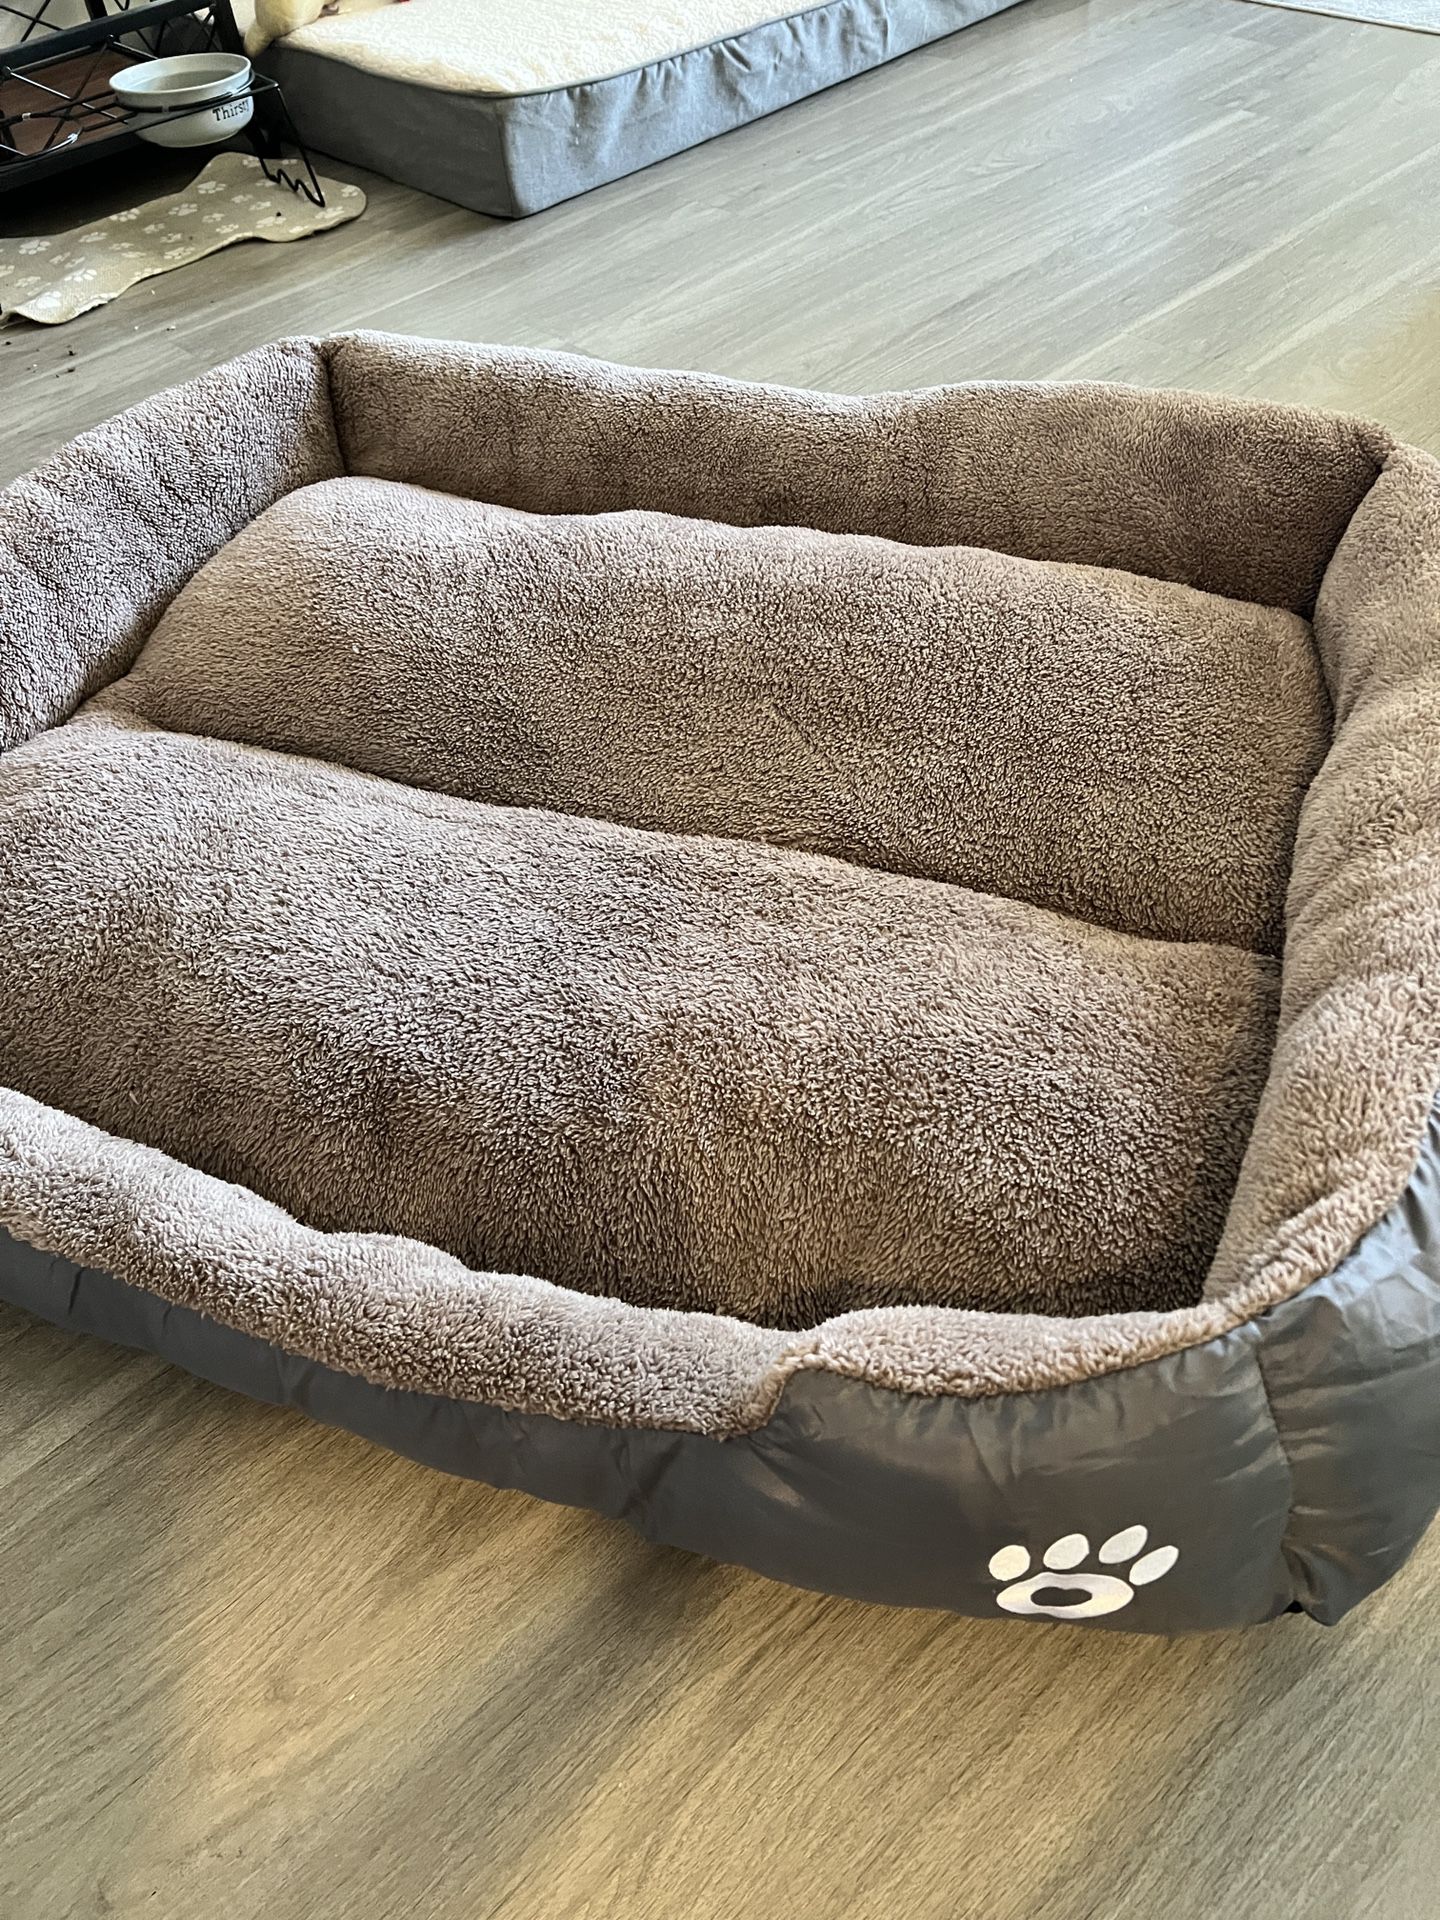 Large dog bed NEW